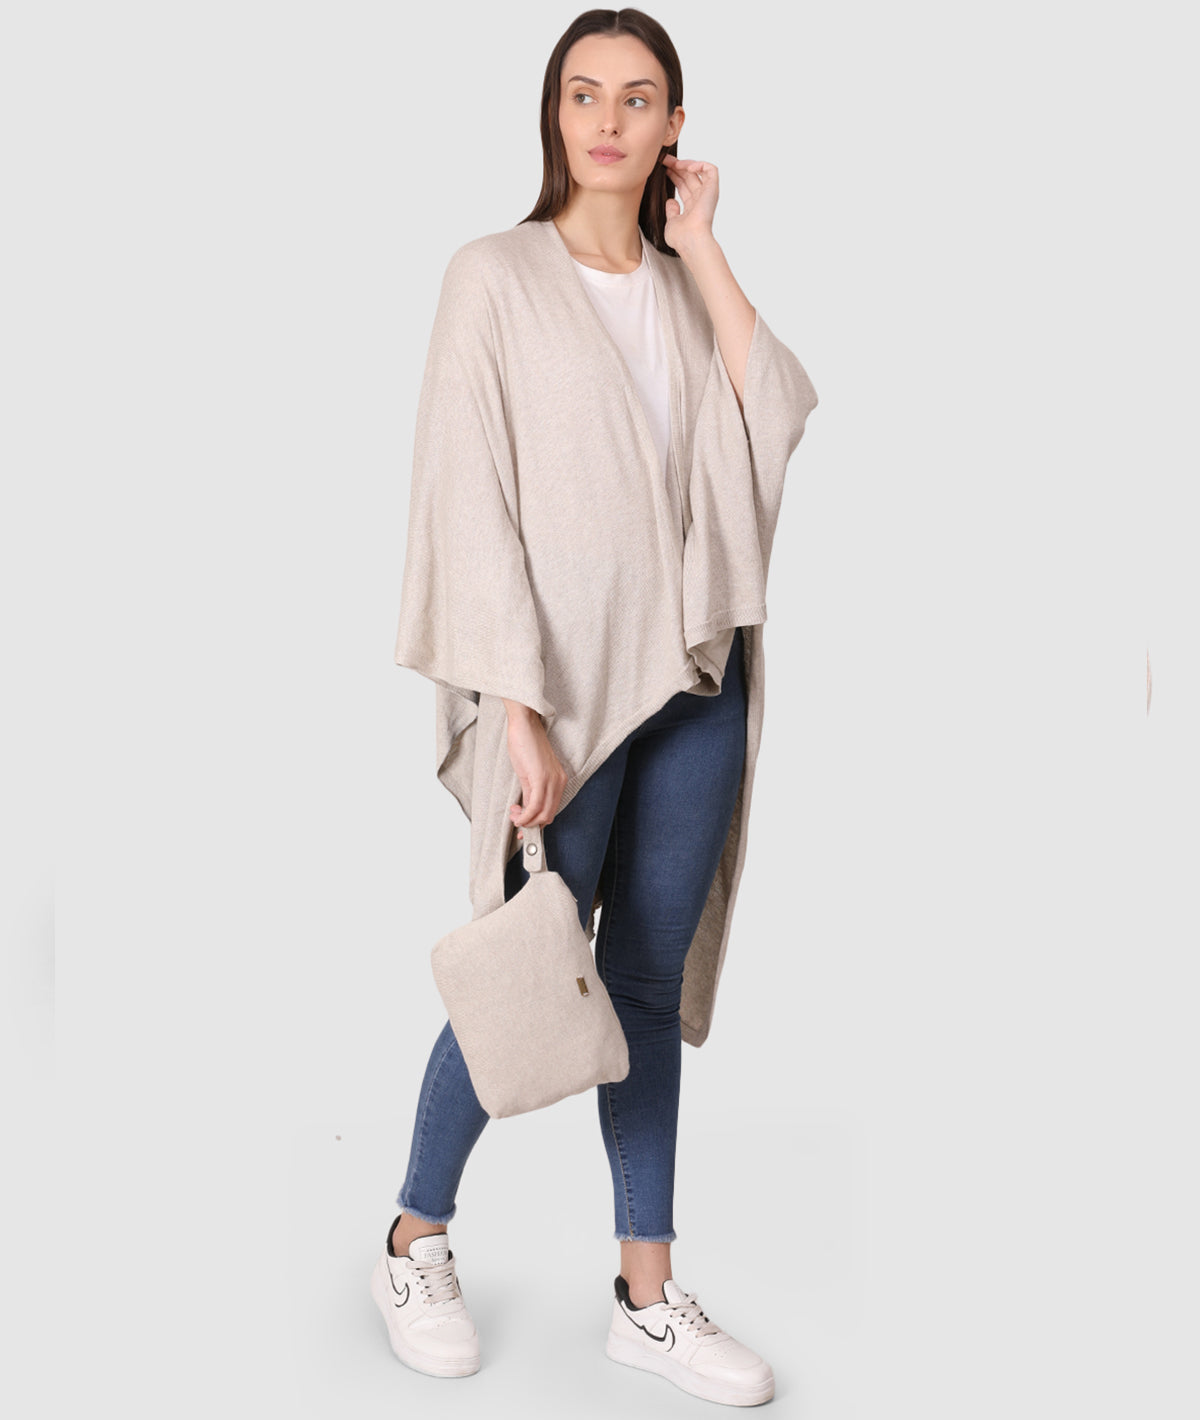 Classic Travel Wrap - Organic Cotton Knitted Light Weight Wrap in Pouch (Light Beige Melange)